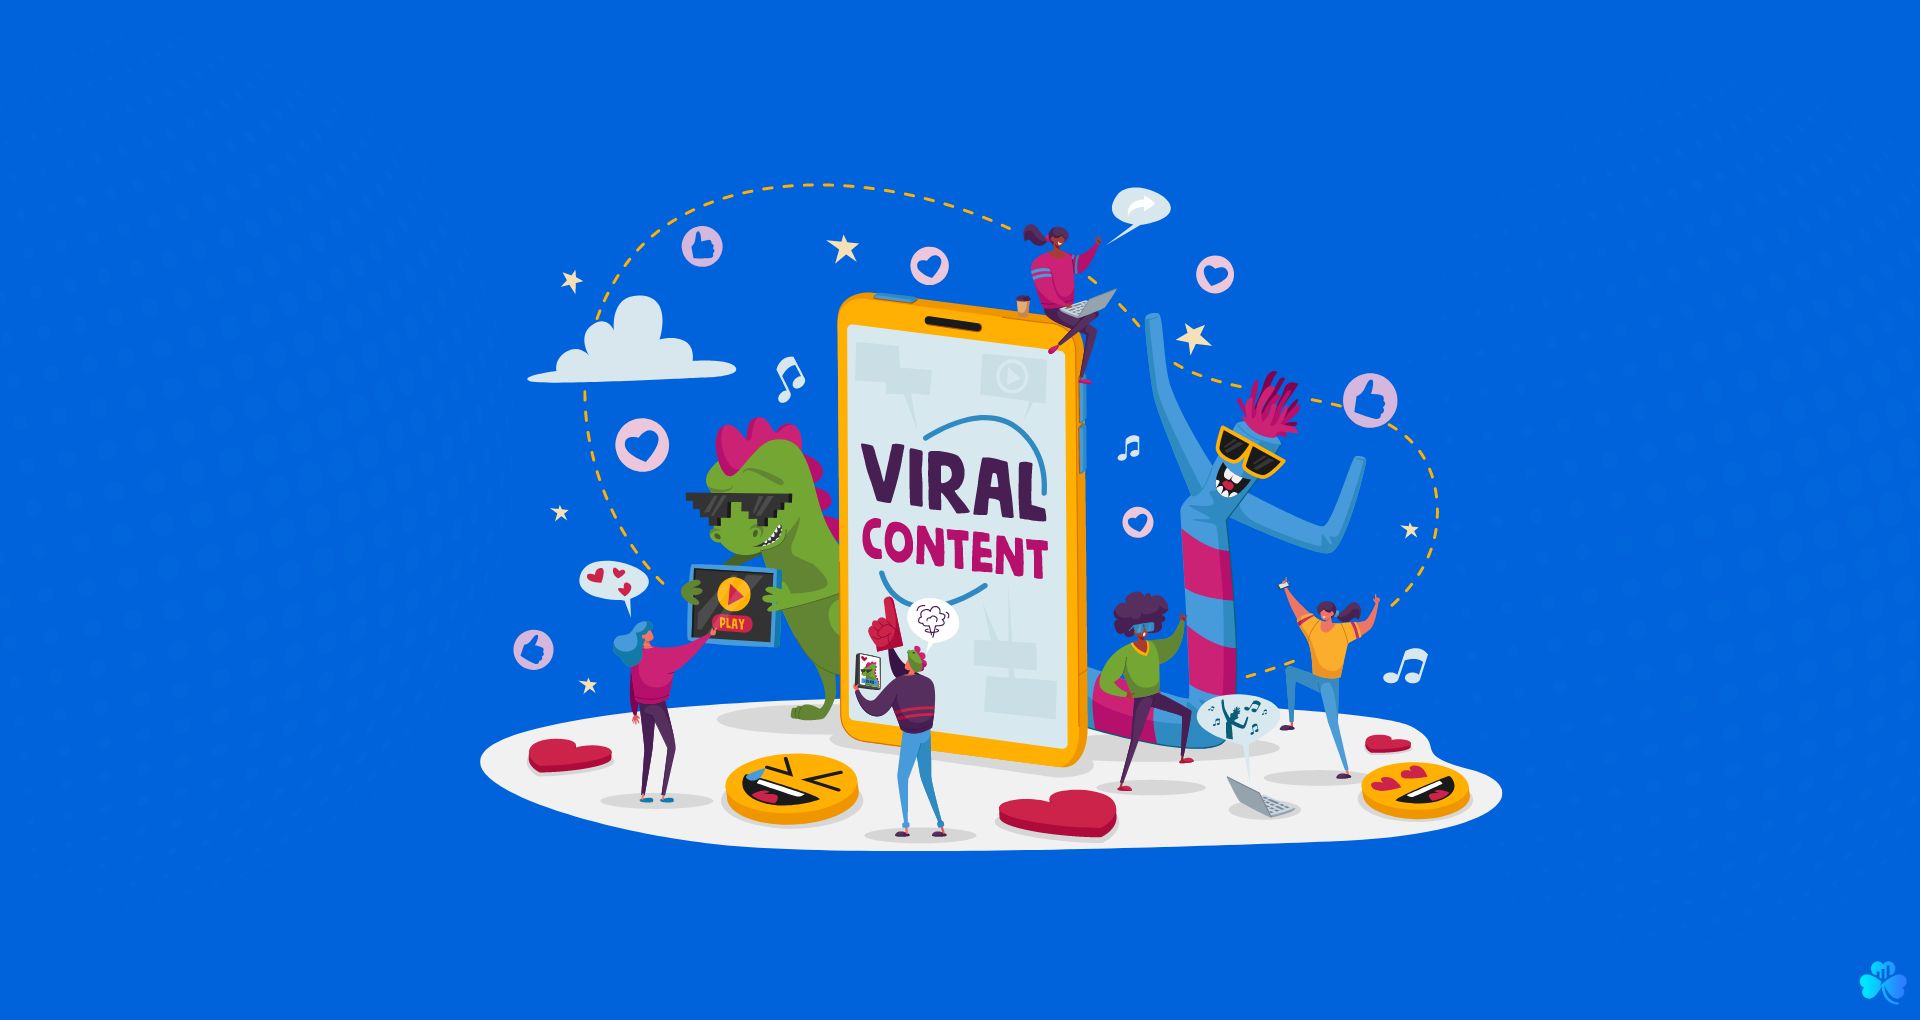 Viral content-graphics of people on blue background